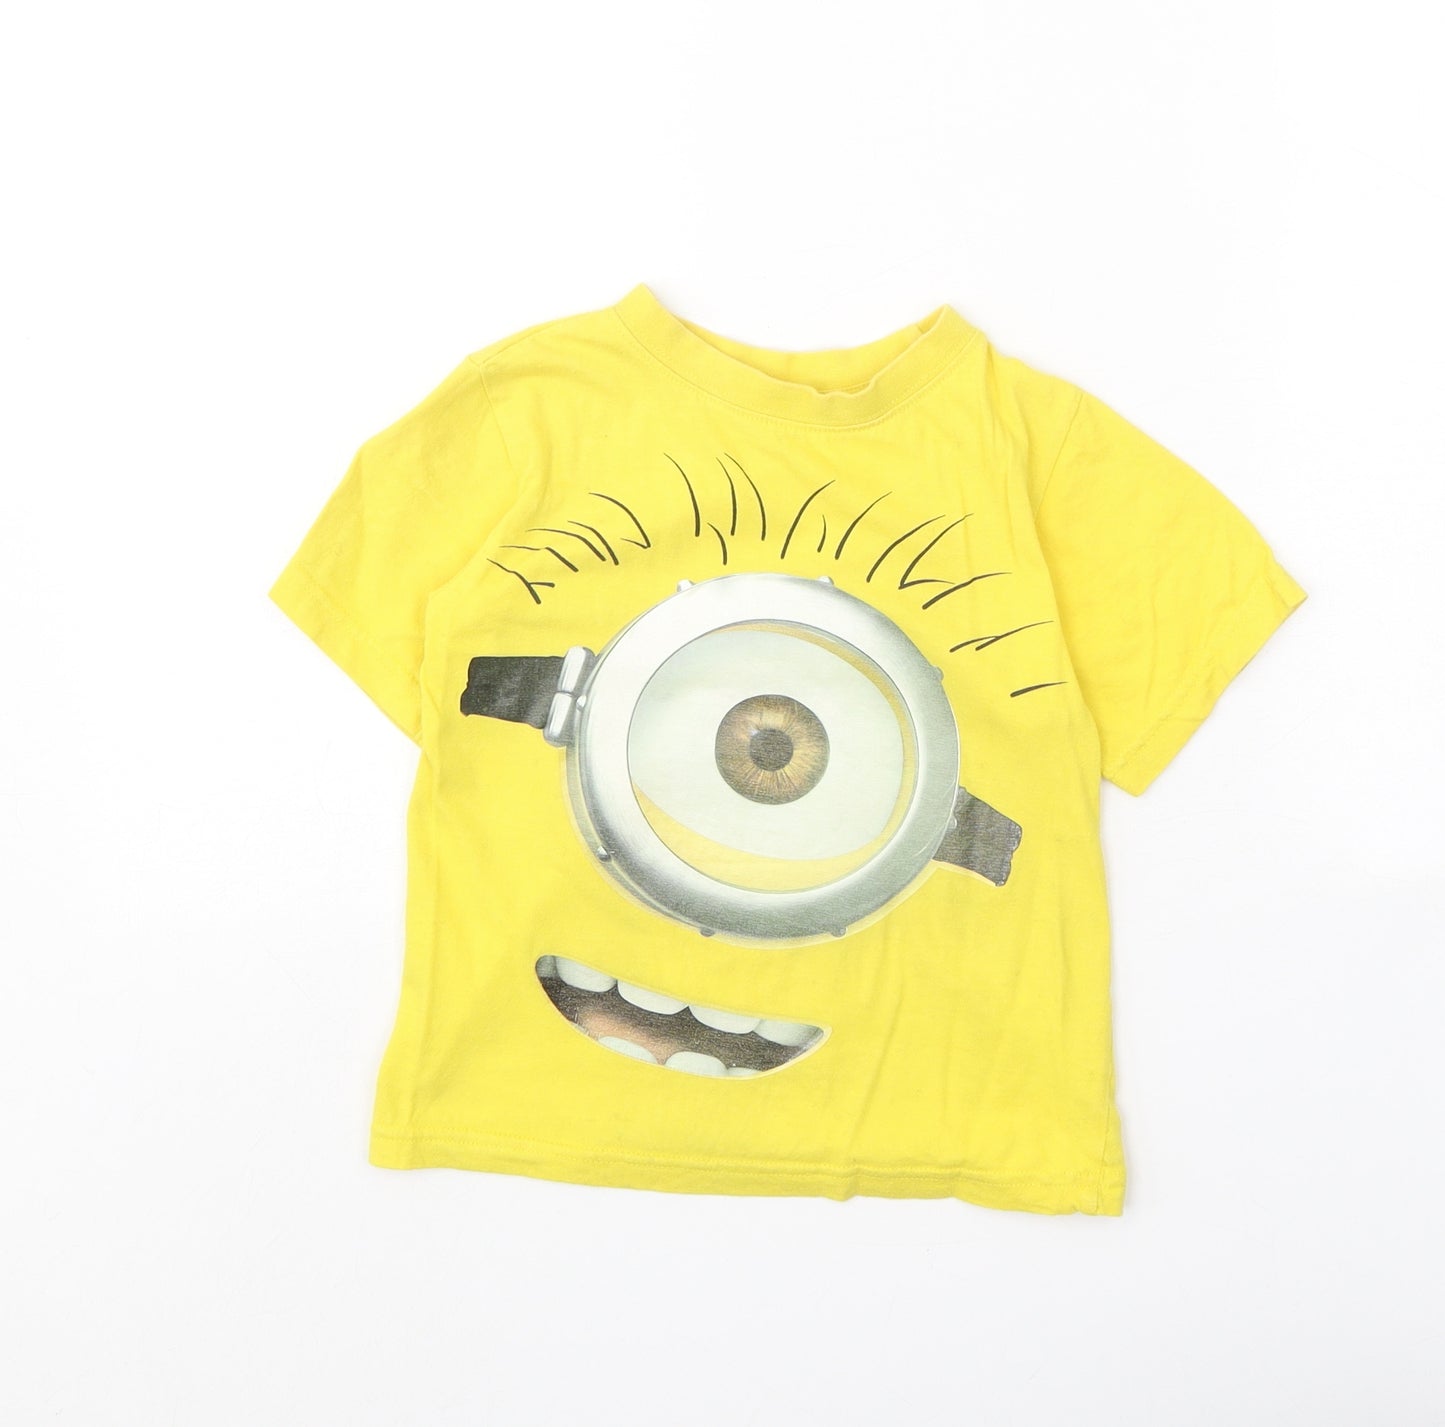 Despicable Me Boys Yellow 100% Cotton Pullover T-Shirt Size 4-5 Years Round Neck Pullover - Minions